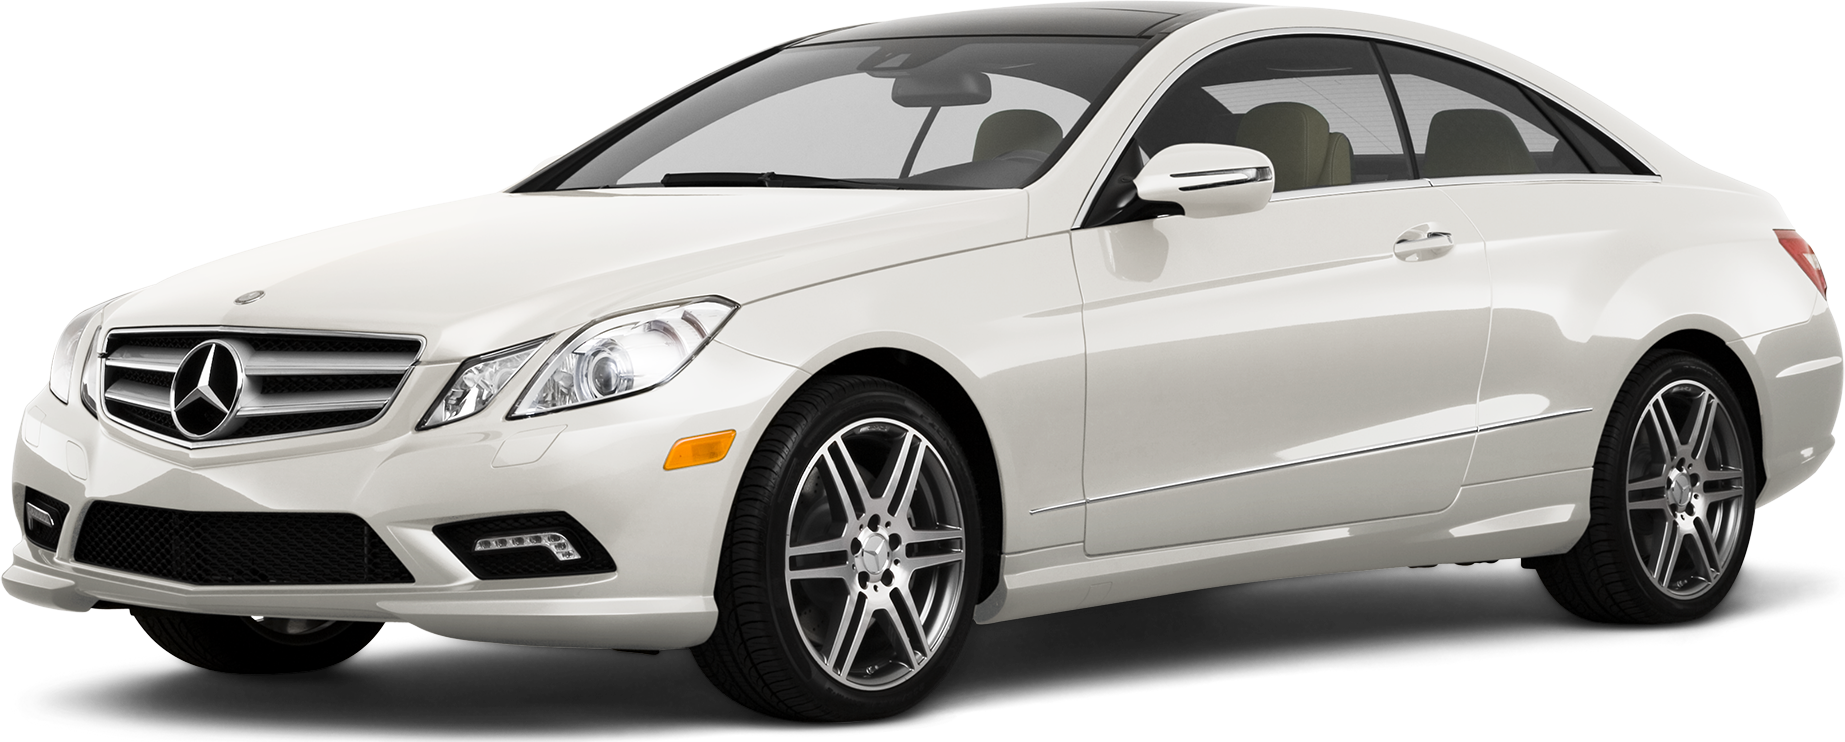 Used 10 Mercedes Benz E Class E 350 Coupe 2d Prices Kelley Blue Book